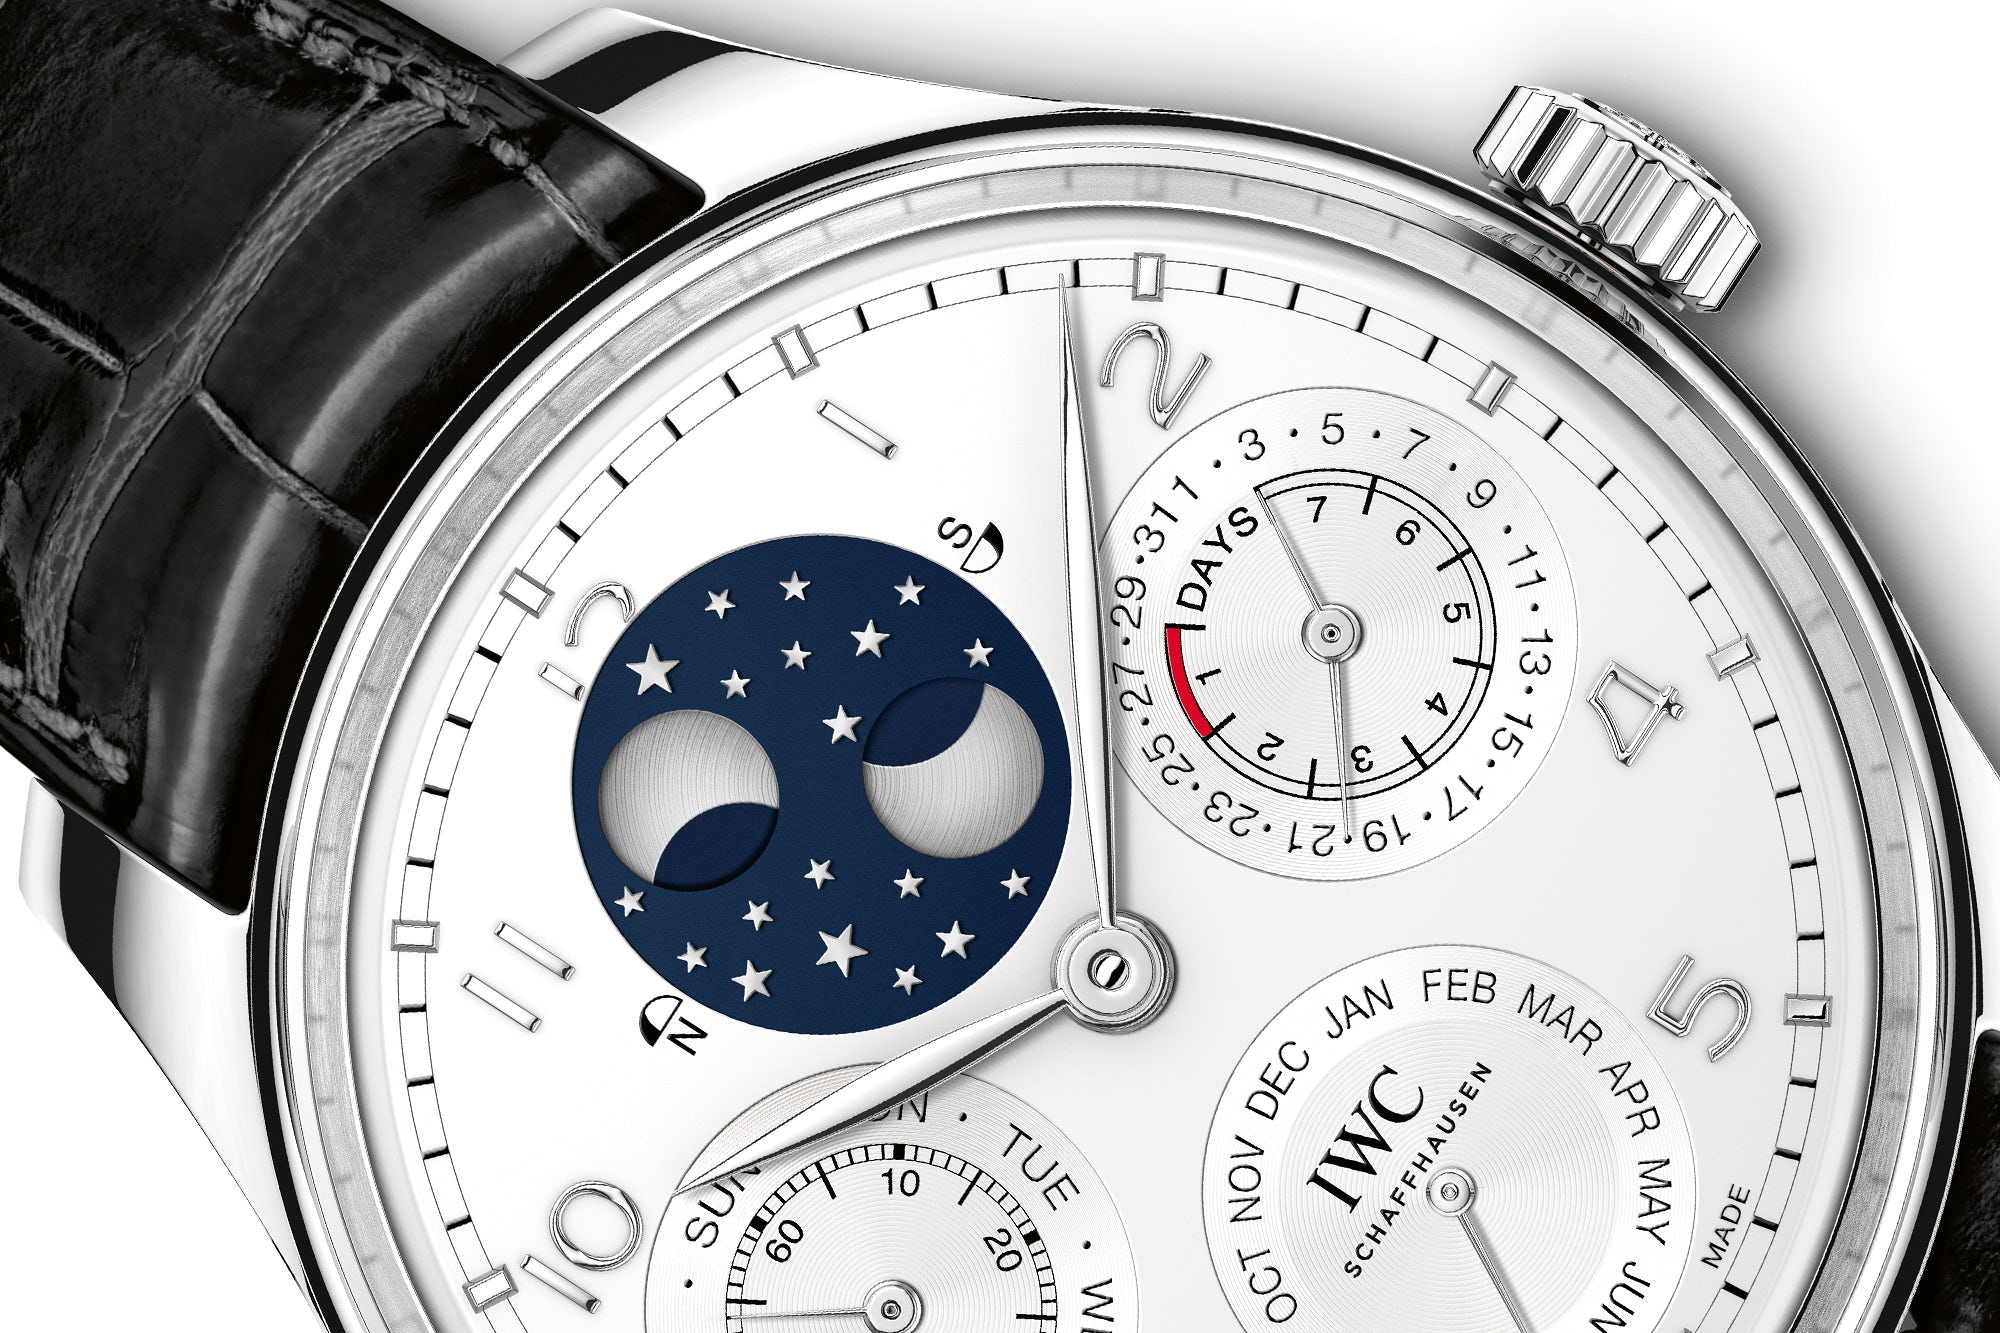 IWC expands the Portugieser family with two new highly covetable models